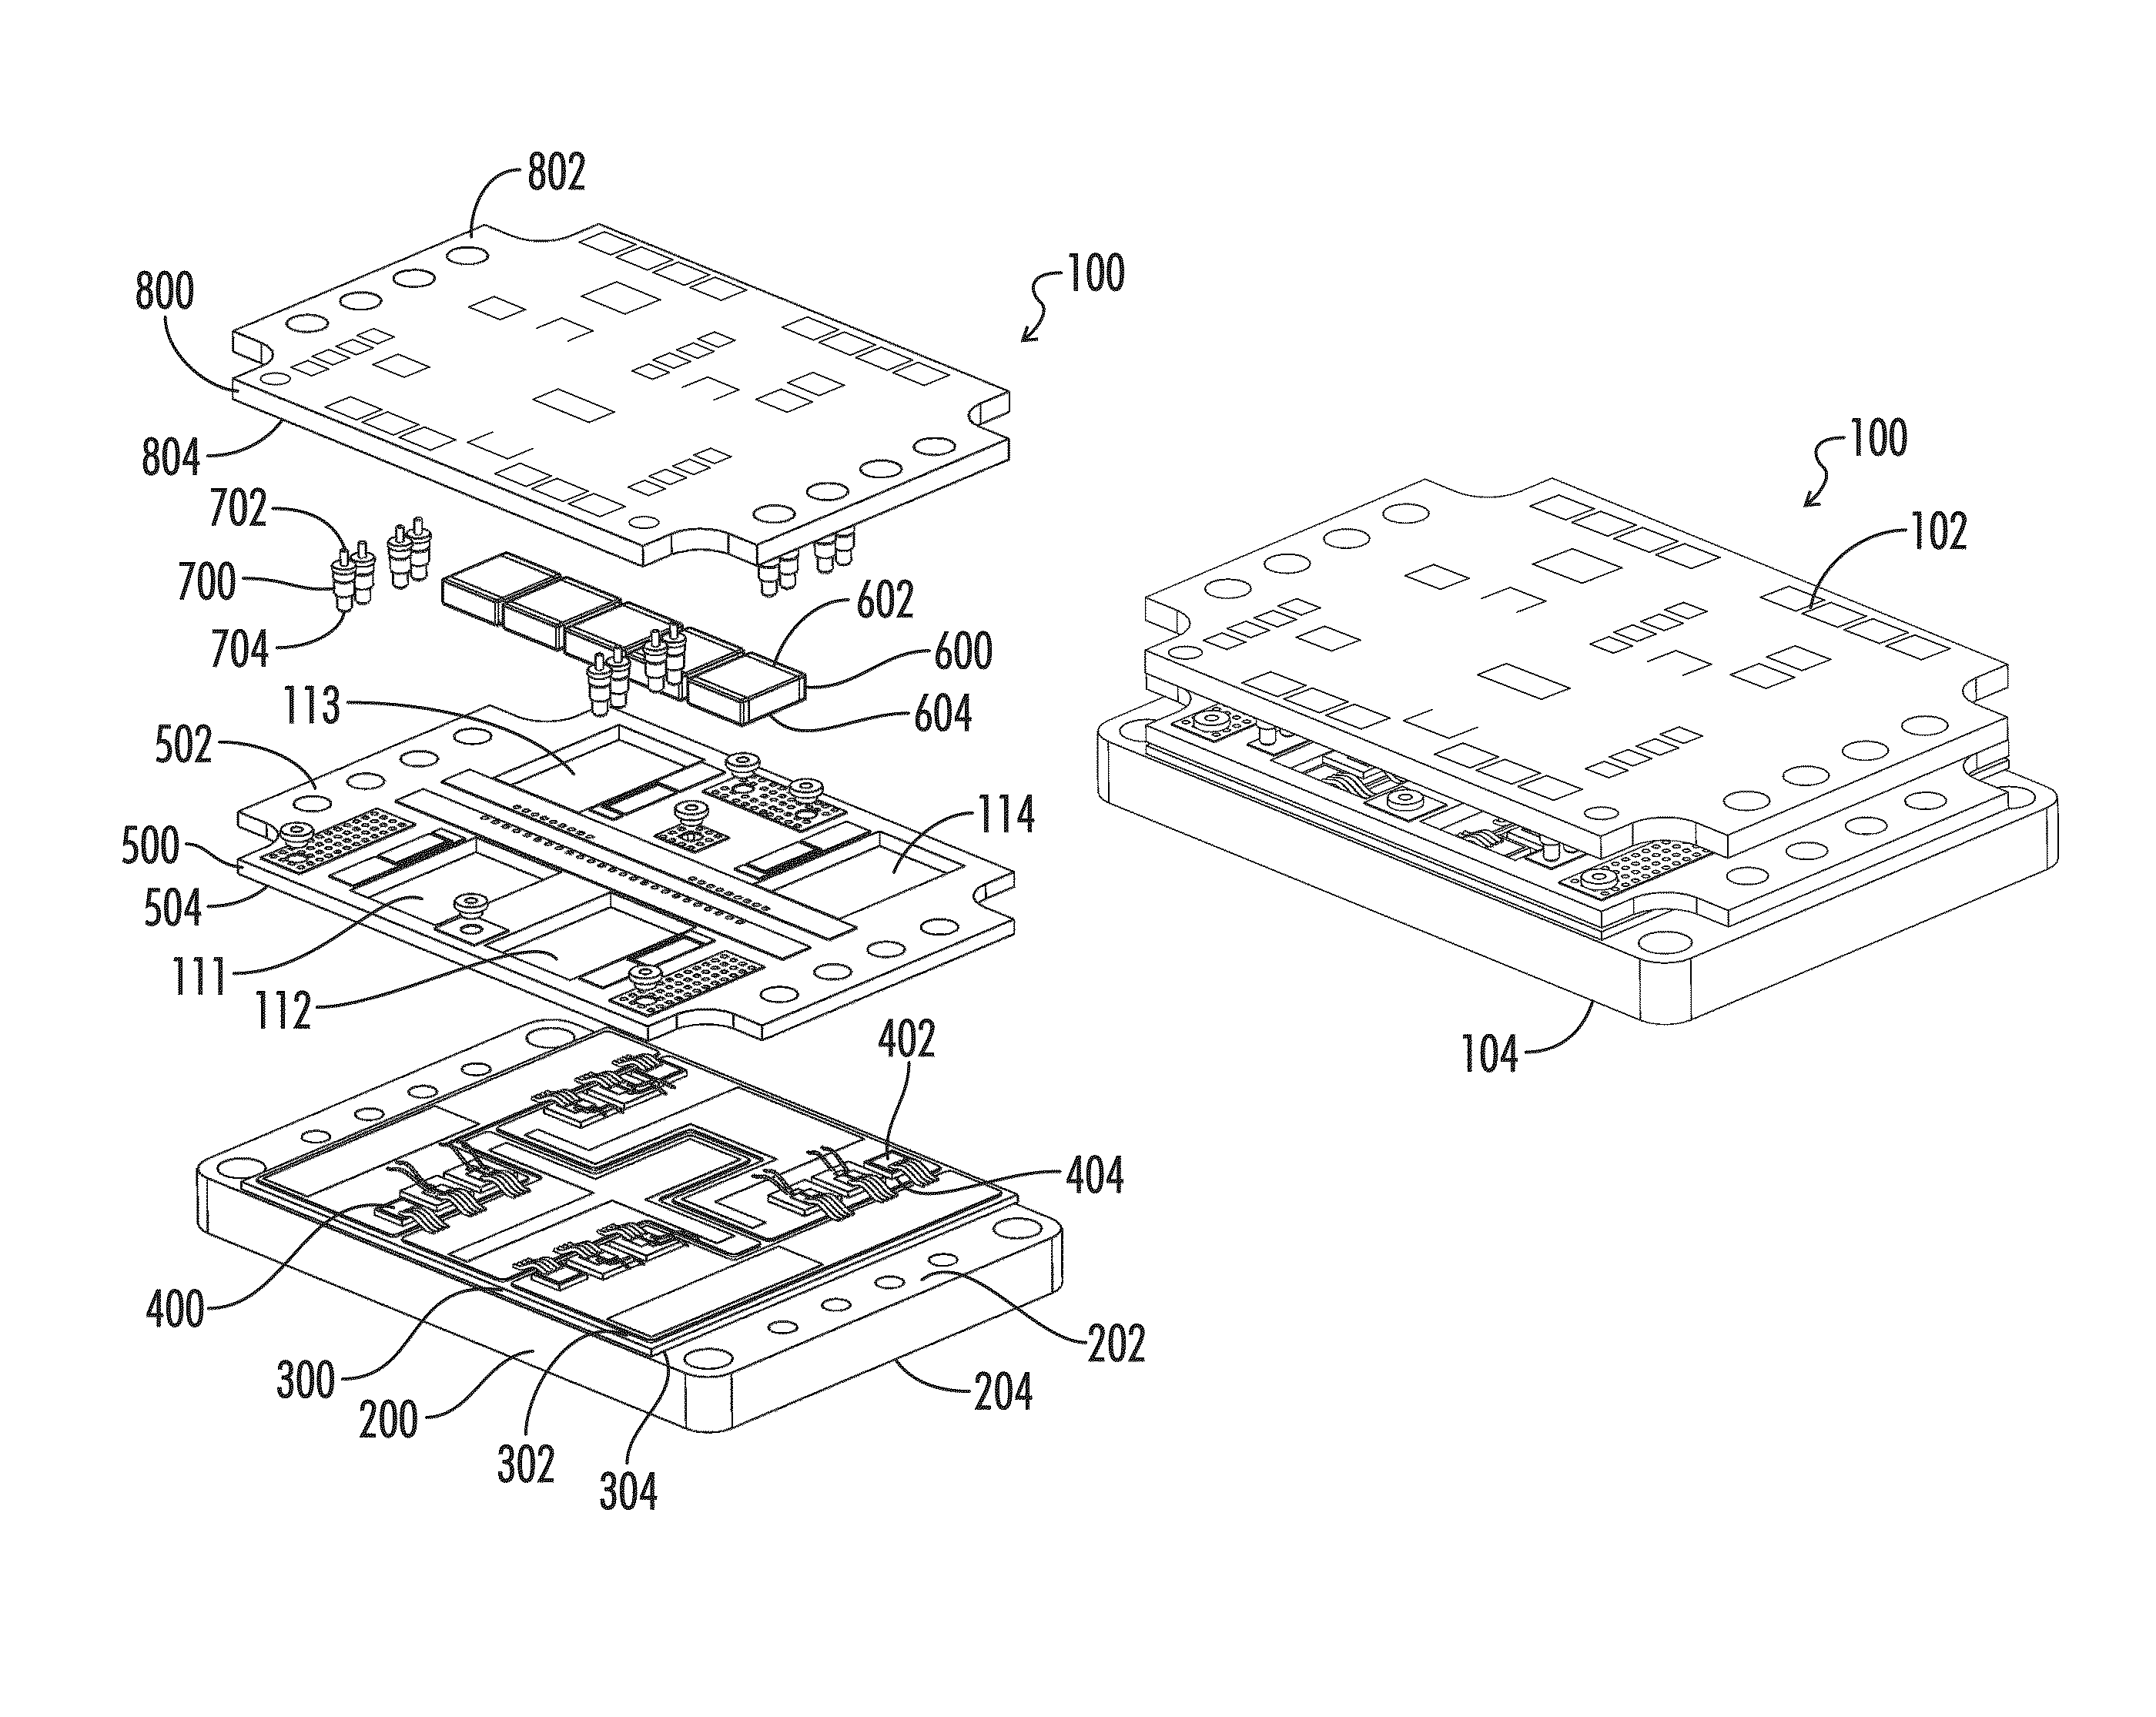 Method for reworkable packaging of high speed, low electrical parasitic power electronics modules through gate drive integration